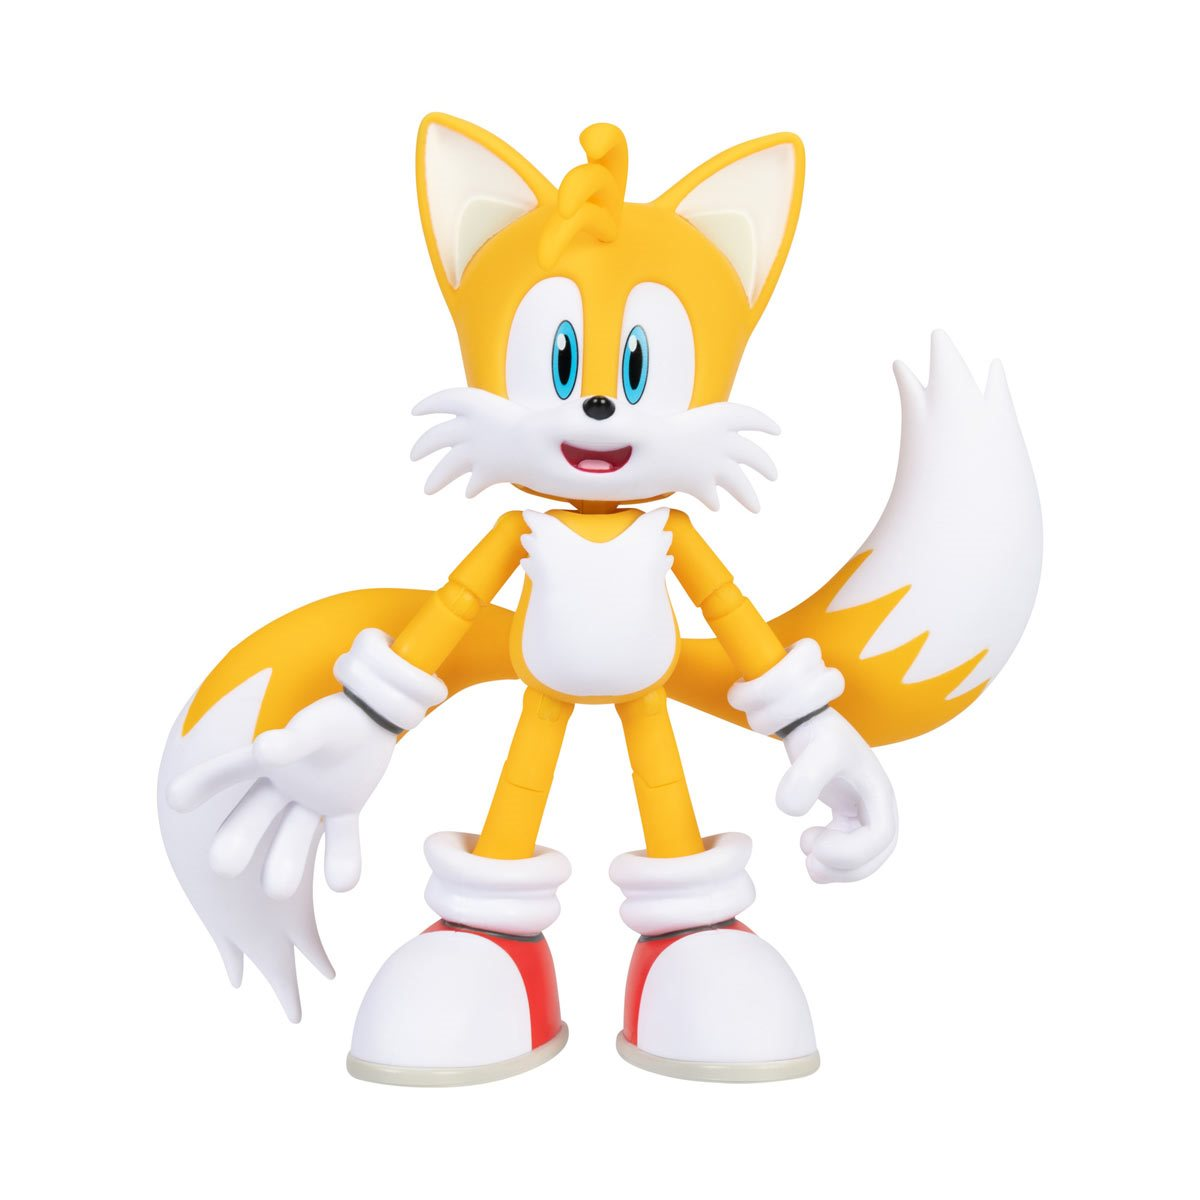 tails render - Google Search  Sonic party, Sonic the hedgehog